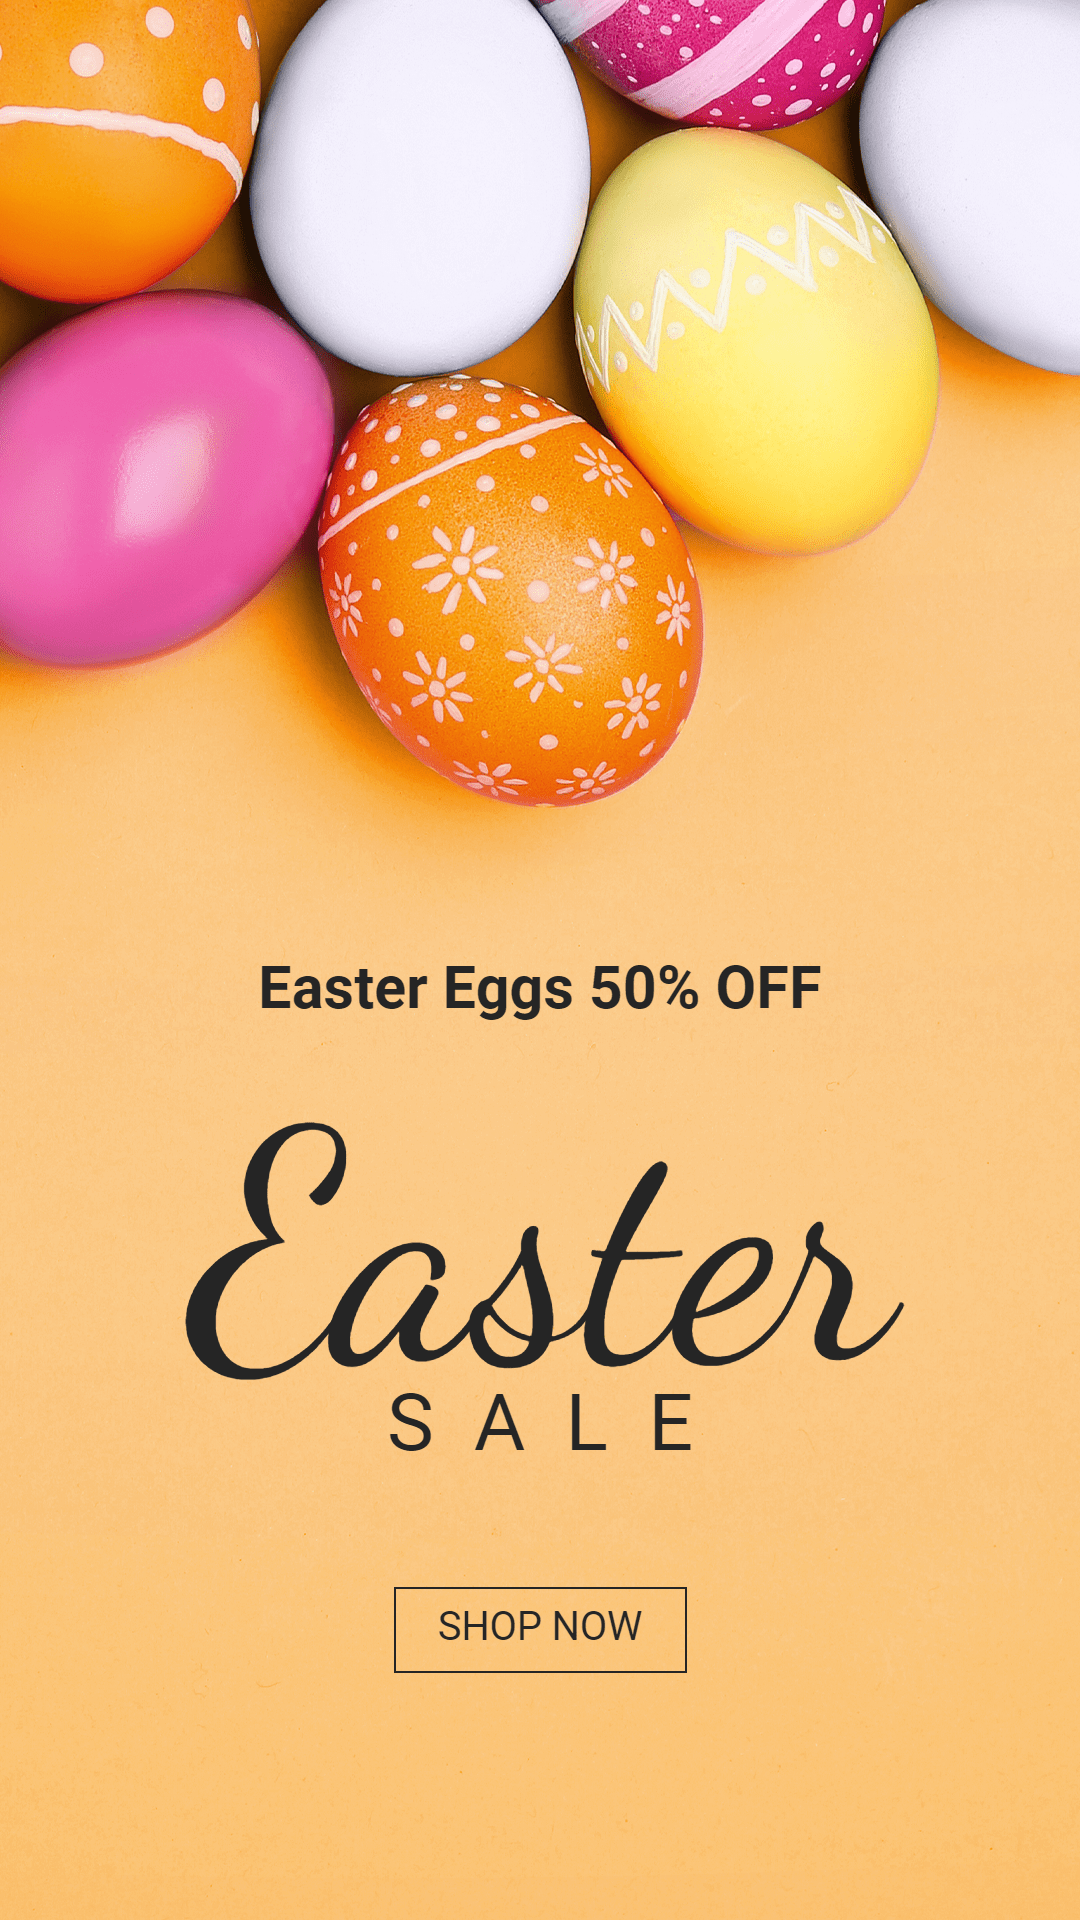 Rectangle Element Easter Egg Home Decorations Sale Promotion Ecommerce Story预览效果